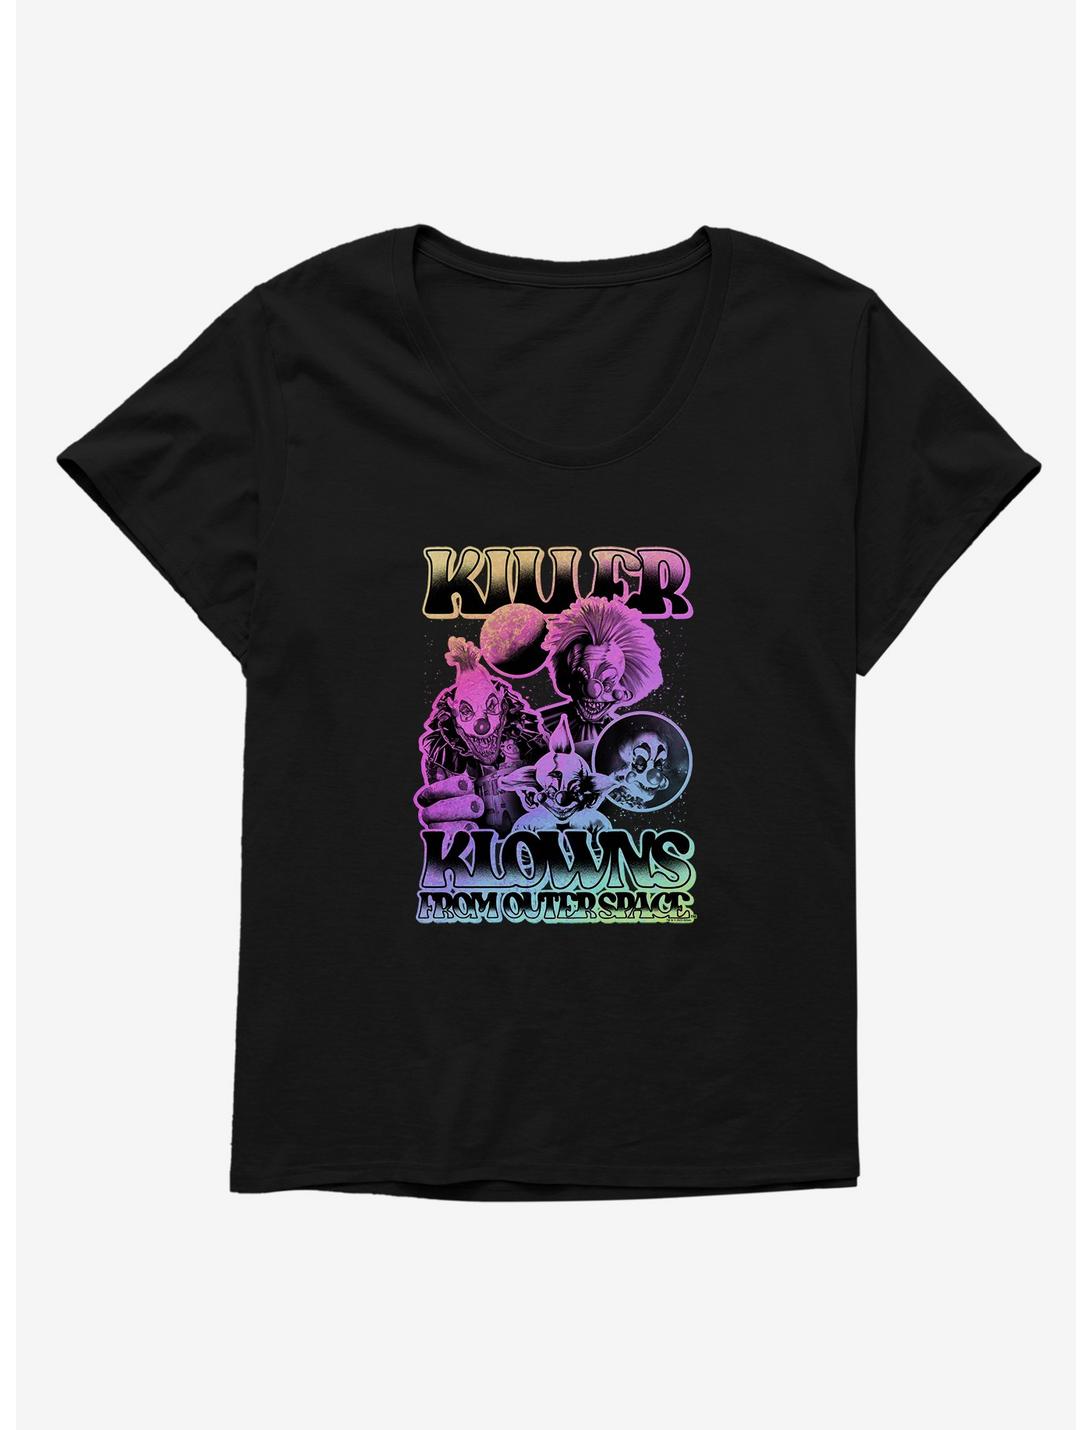 Killer Klowns From Outer Space Gradient Group Girls T-Shirt Plus Size, BLACK, hi-res